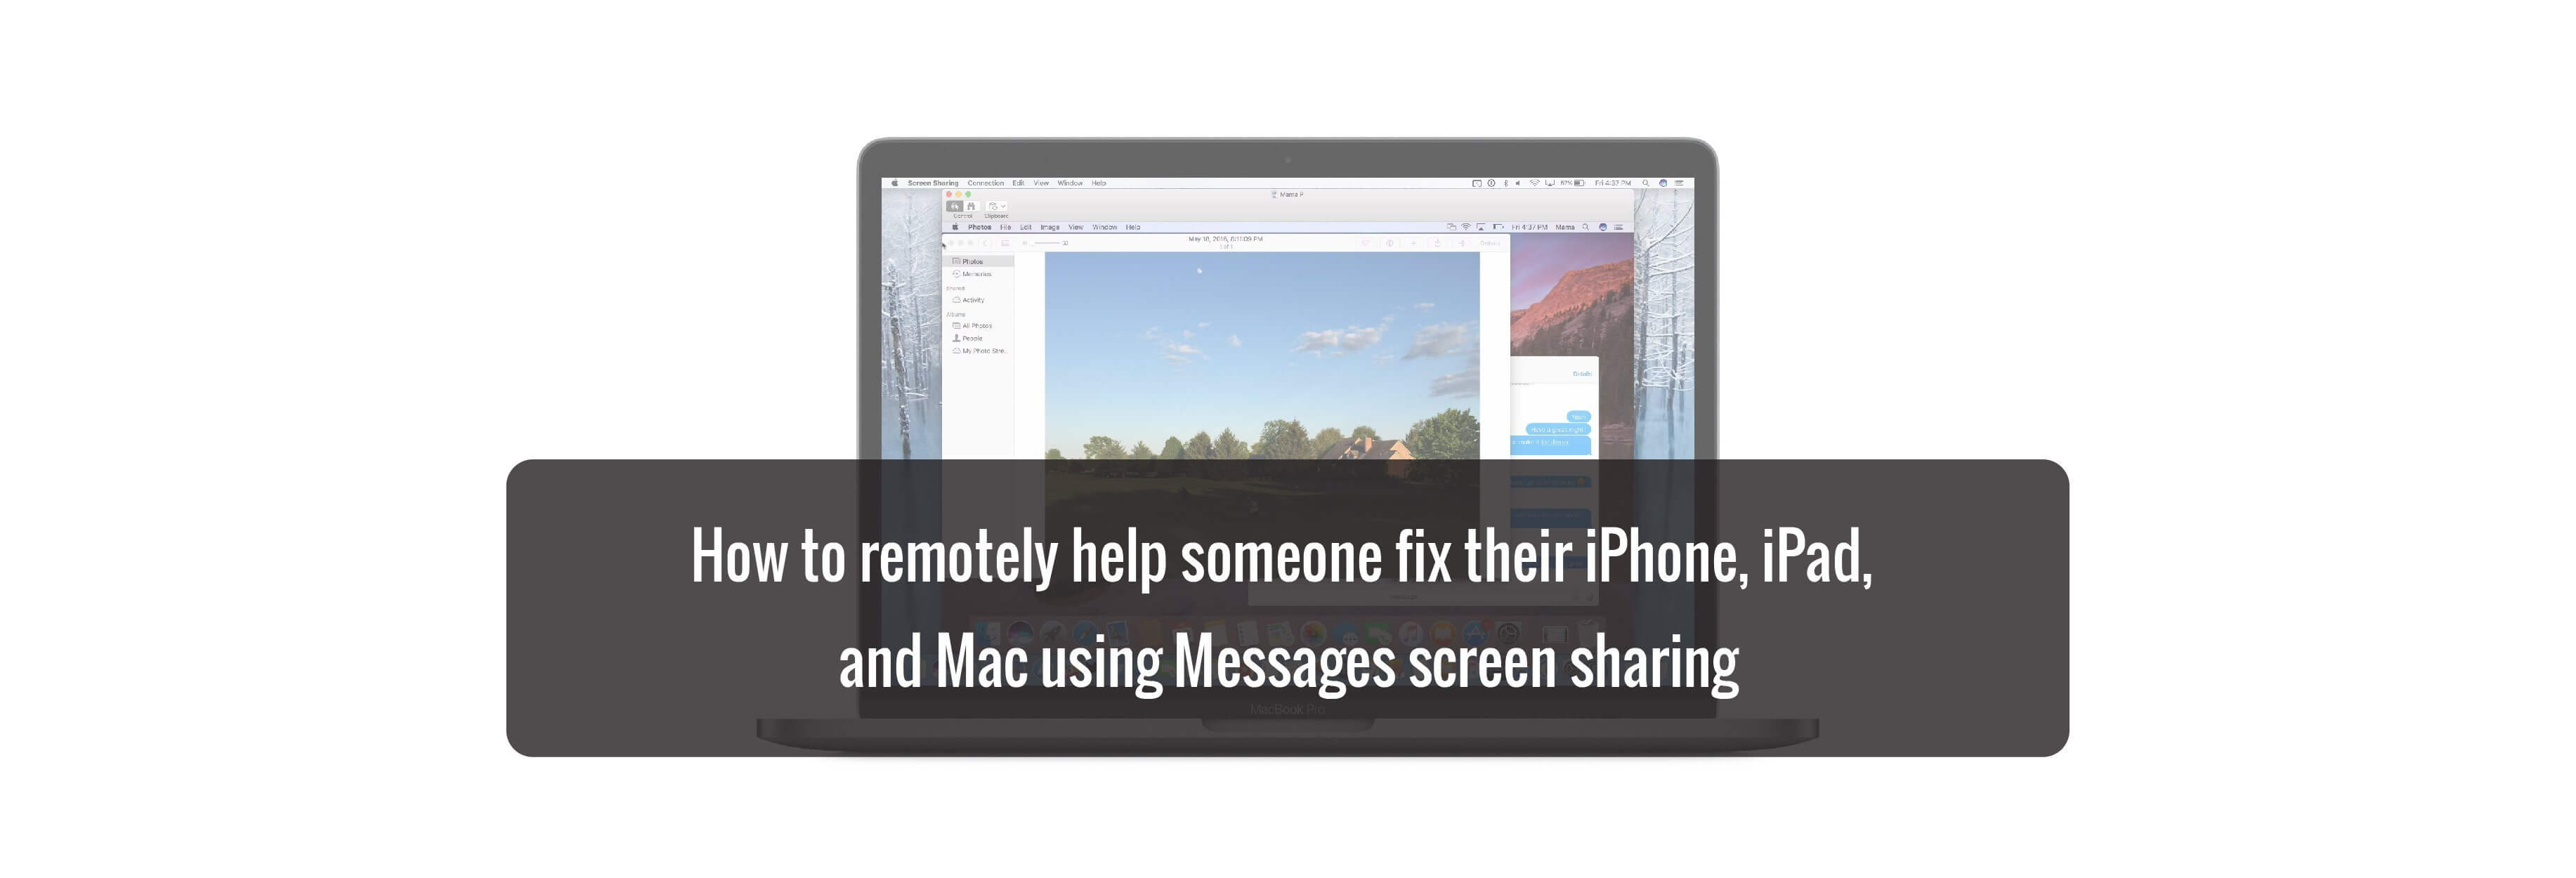 How to remotely help someone fix their iPhone, iPad, and Mac using Messages screen sharing